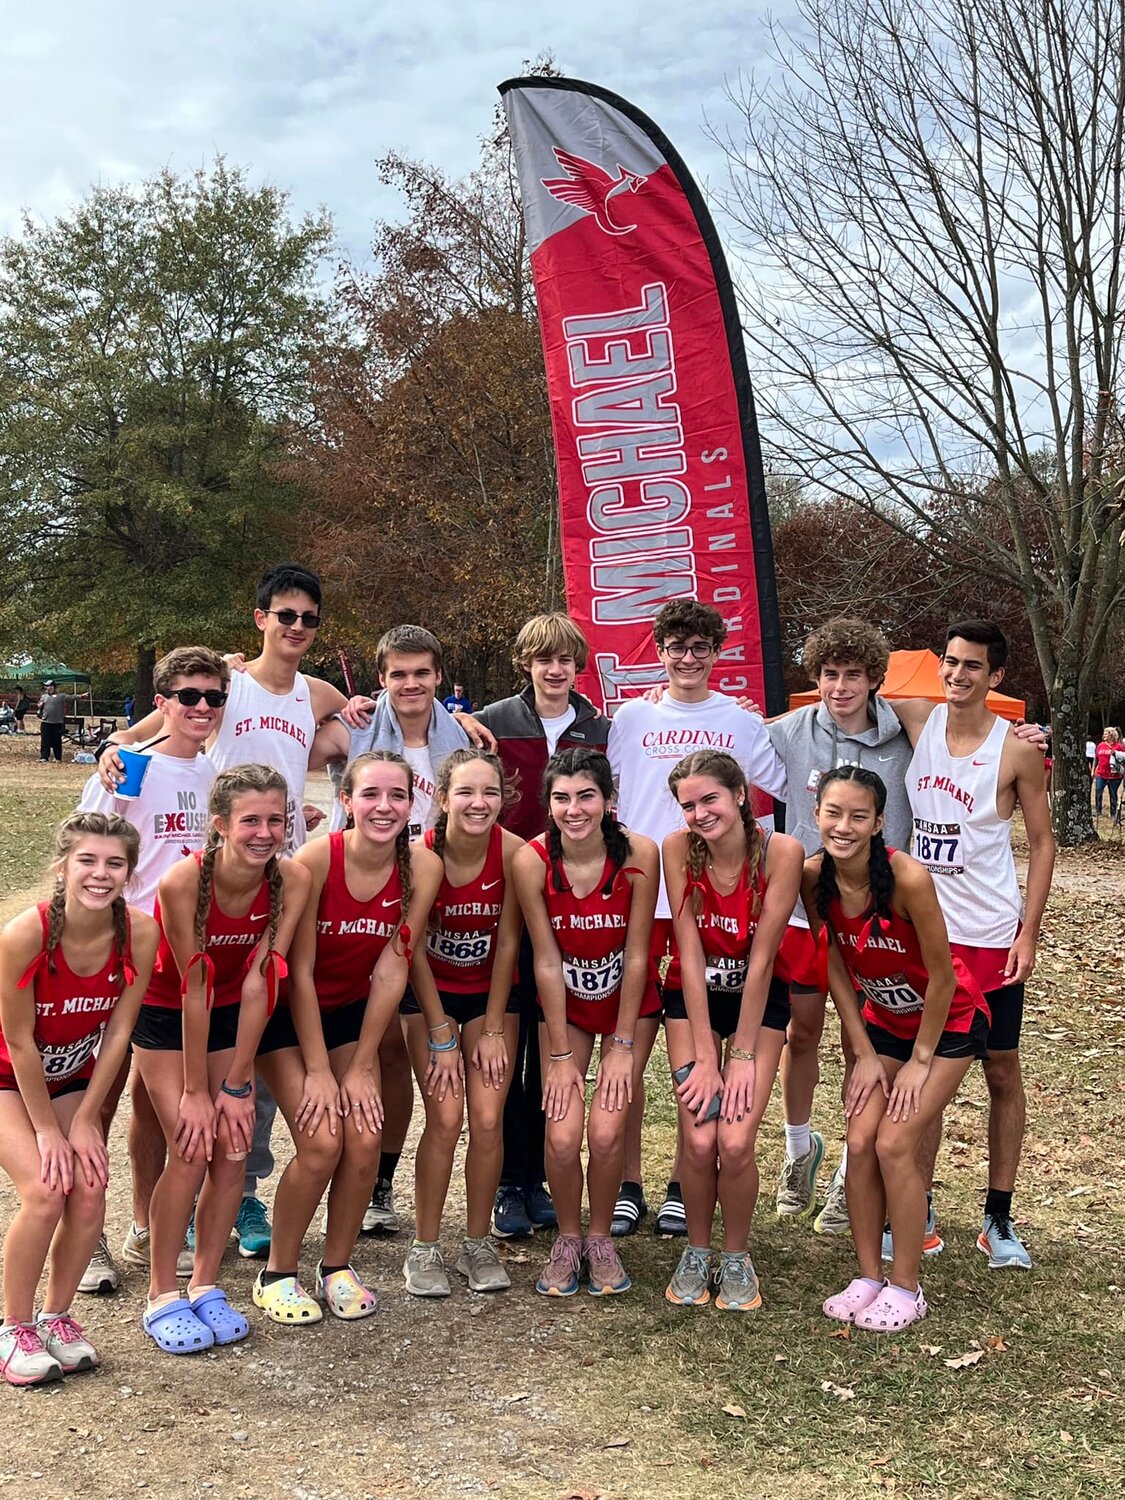 Both cross country teams from St. Michael Catholic earned top-10 finishes where the boys’ team earned fifth and the girls’ squad took eighth. Senior Ryan Lankford (18th) and junior Natalia Pyatt (39th) led their respective teams on the Class 4A stage.